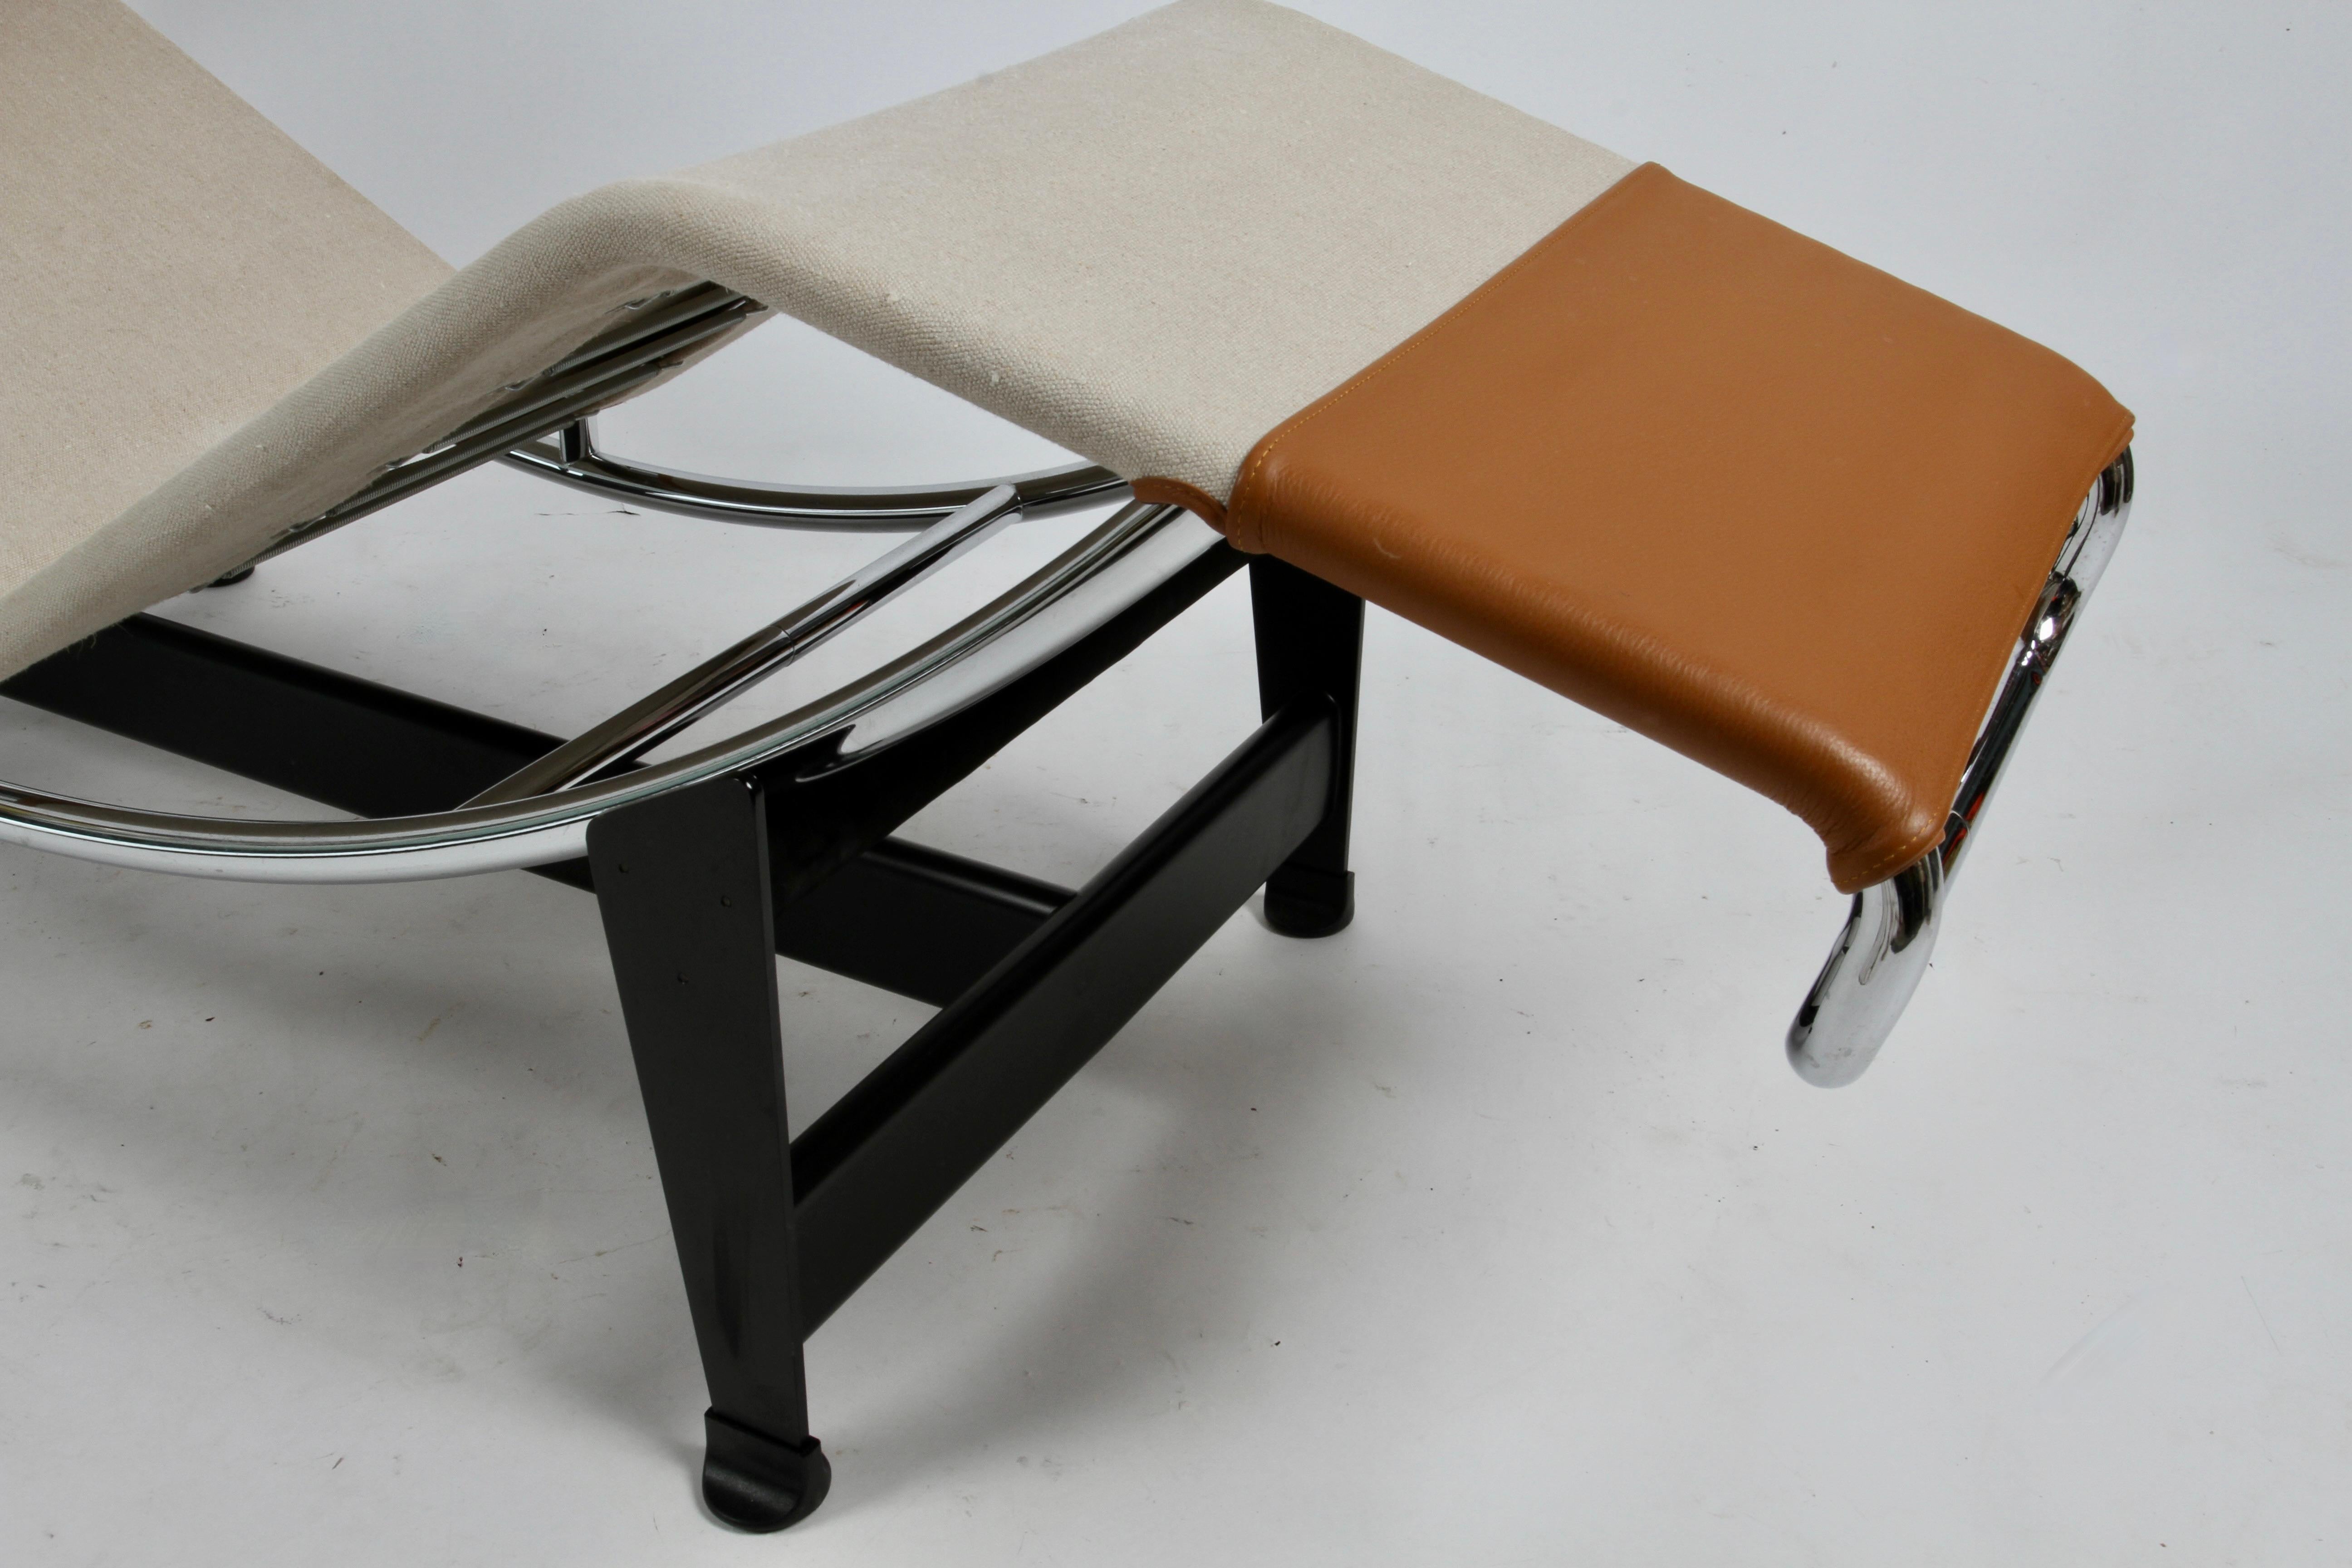 Lc4 Chaise Lounge Canvas & Leather, Charlotte Perriand & Le Corbusier, Cassina 1